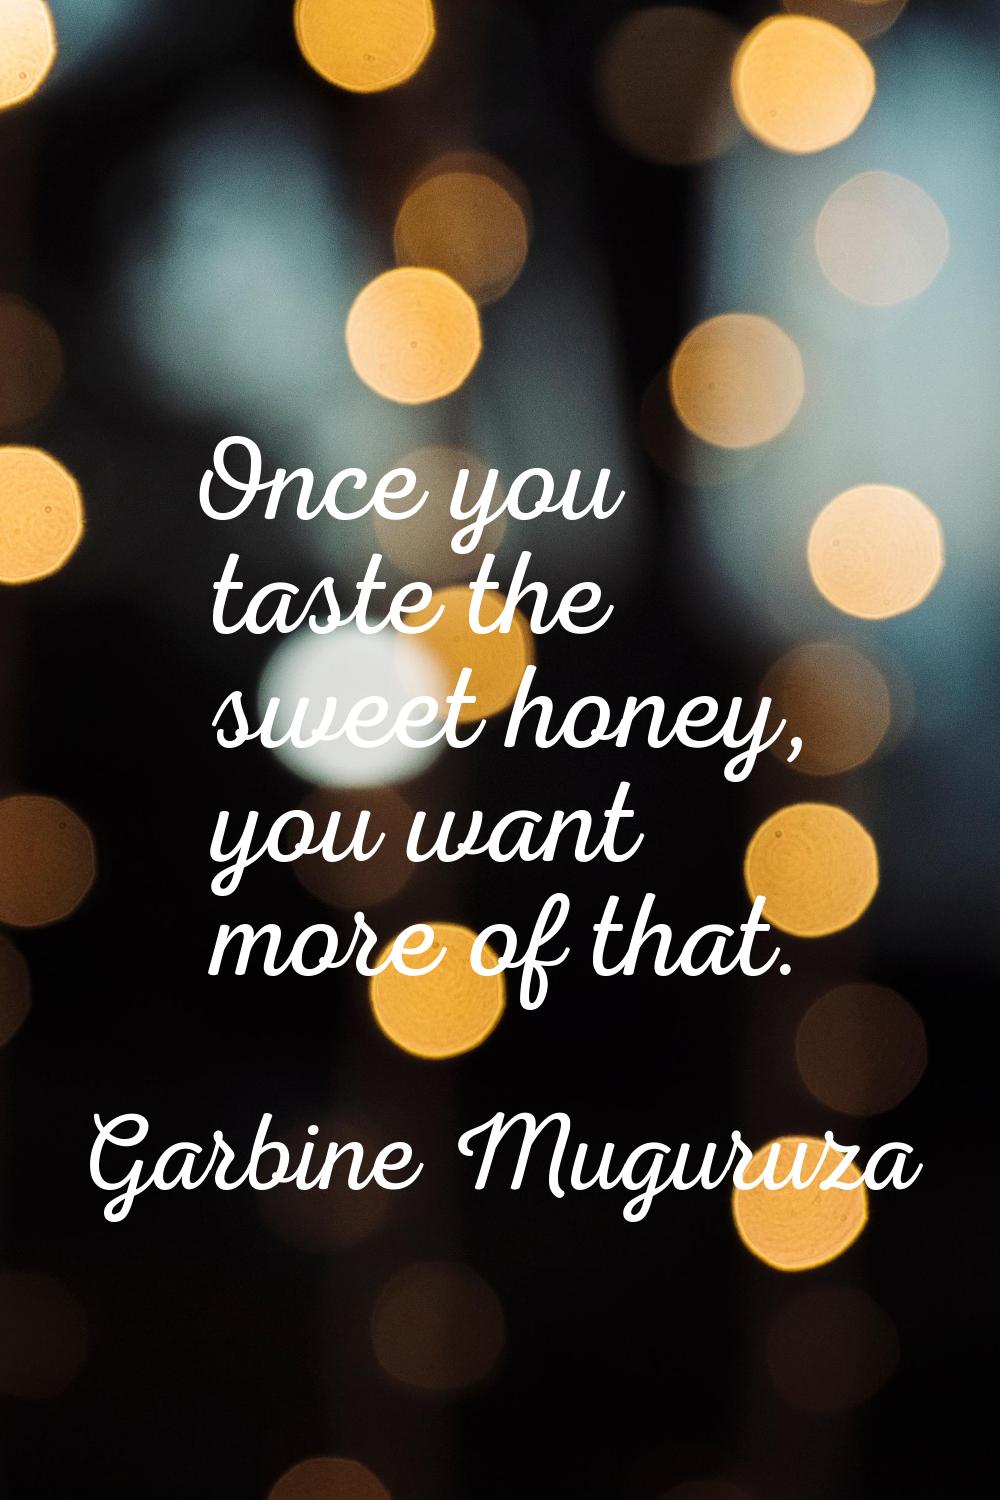 Once you taste the sweet honey, you want more of that.